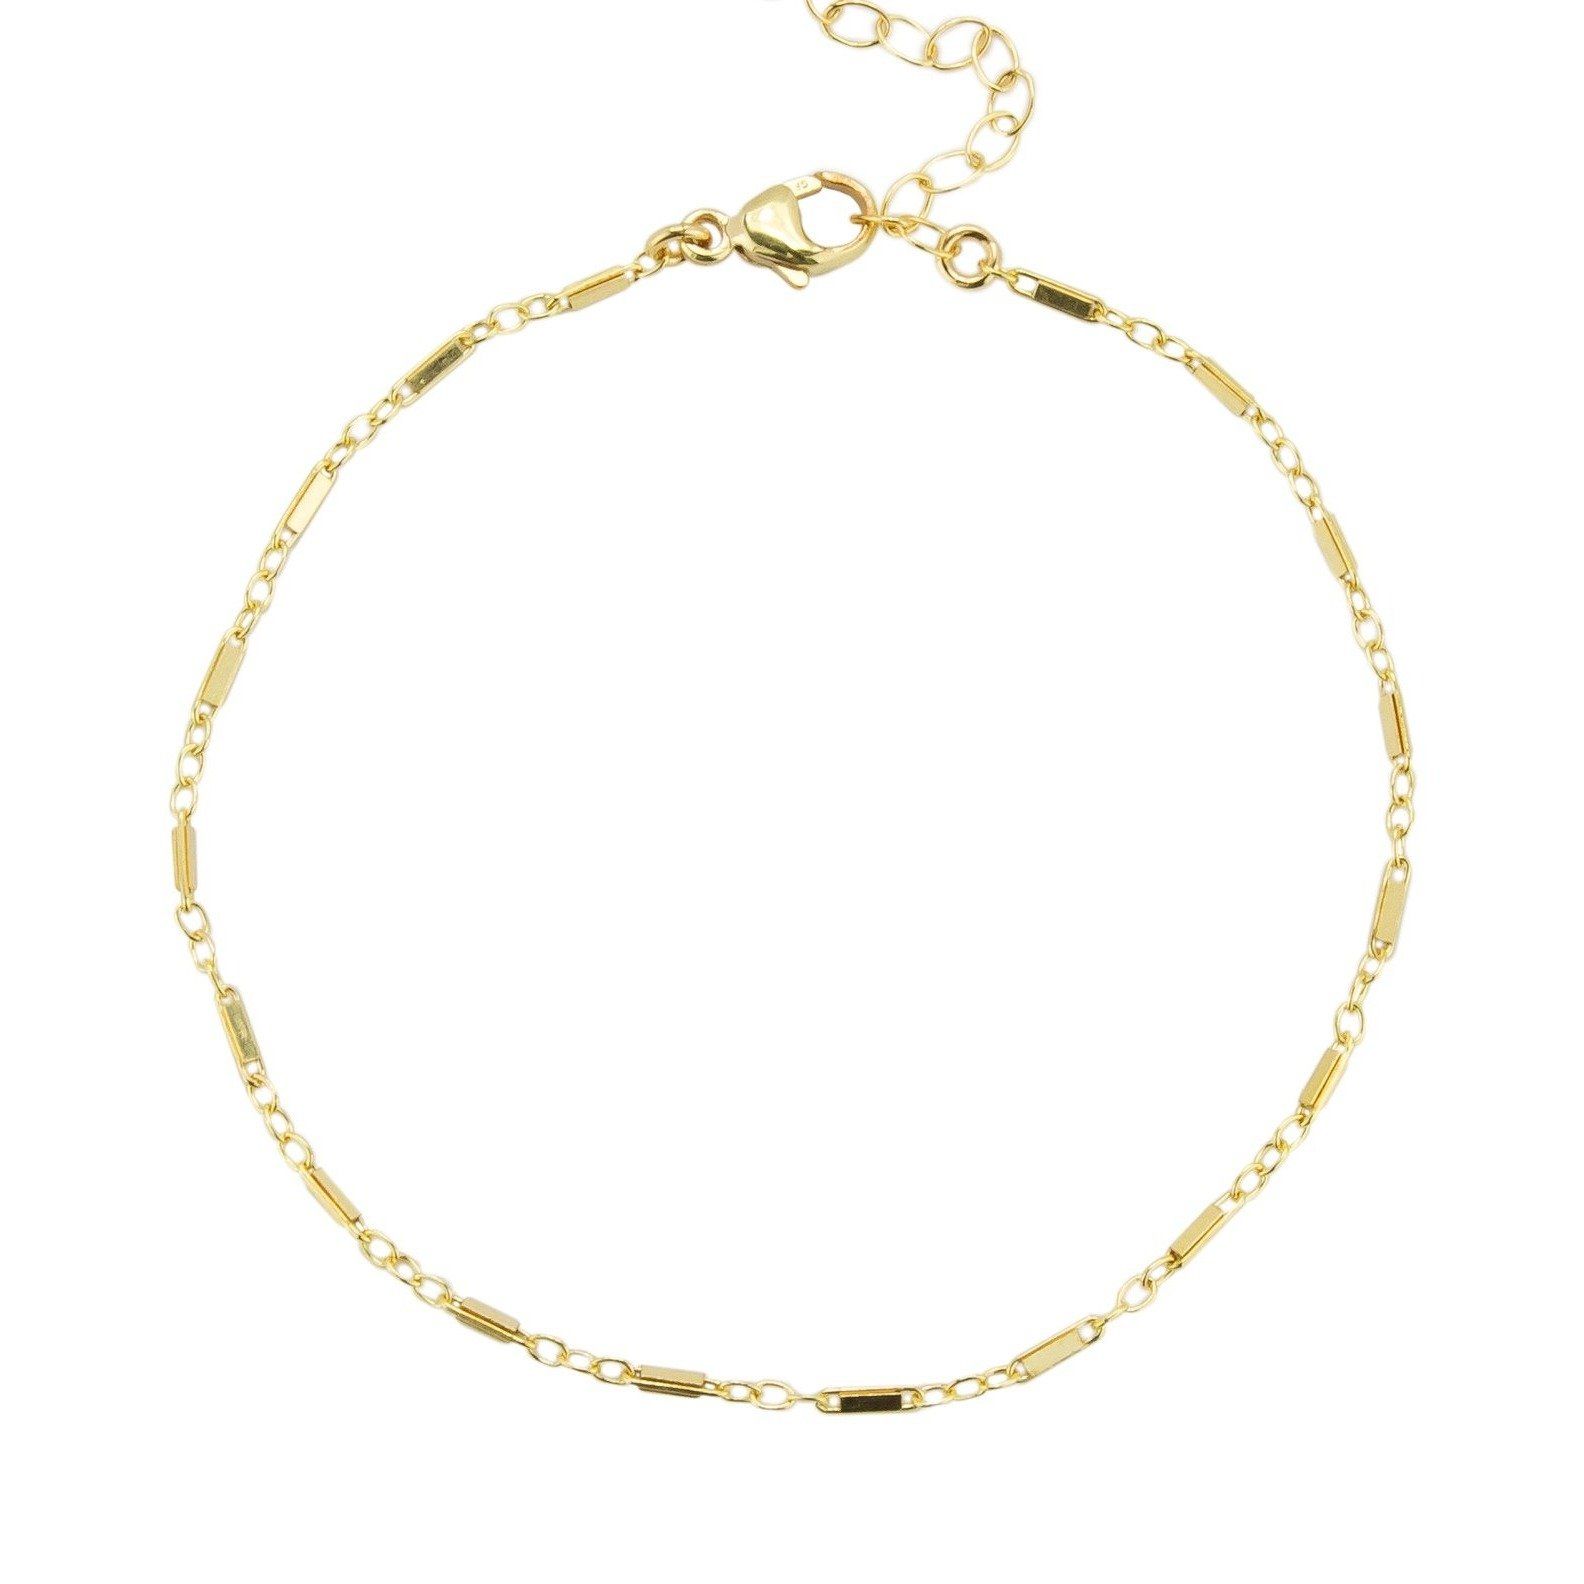 Dainty, handmade Linked Anklet by Katie Dean Jewelry. Perfect for Summer!